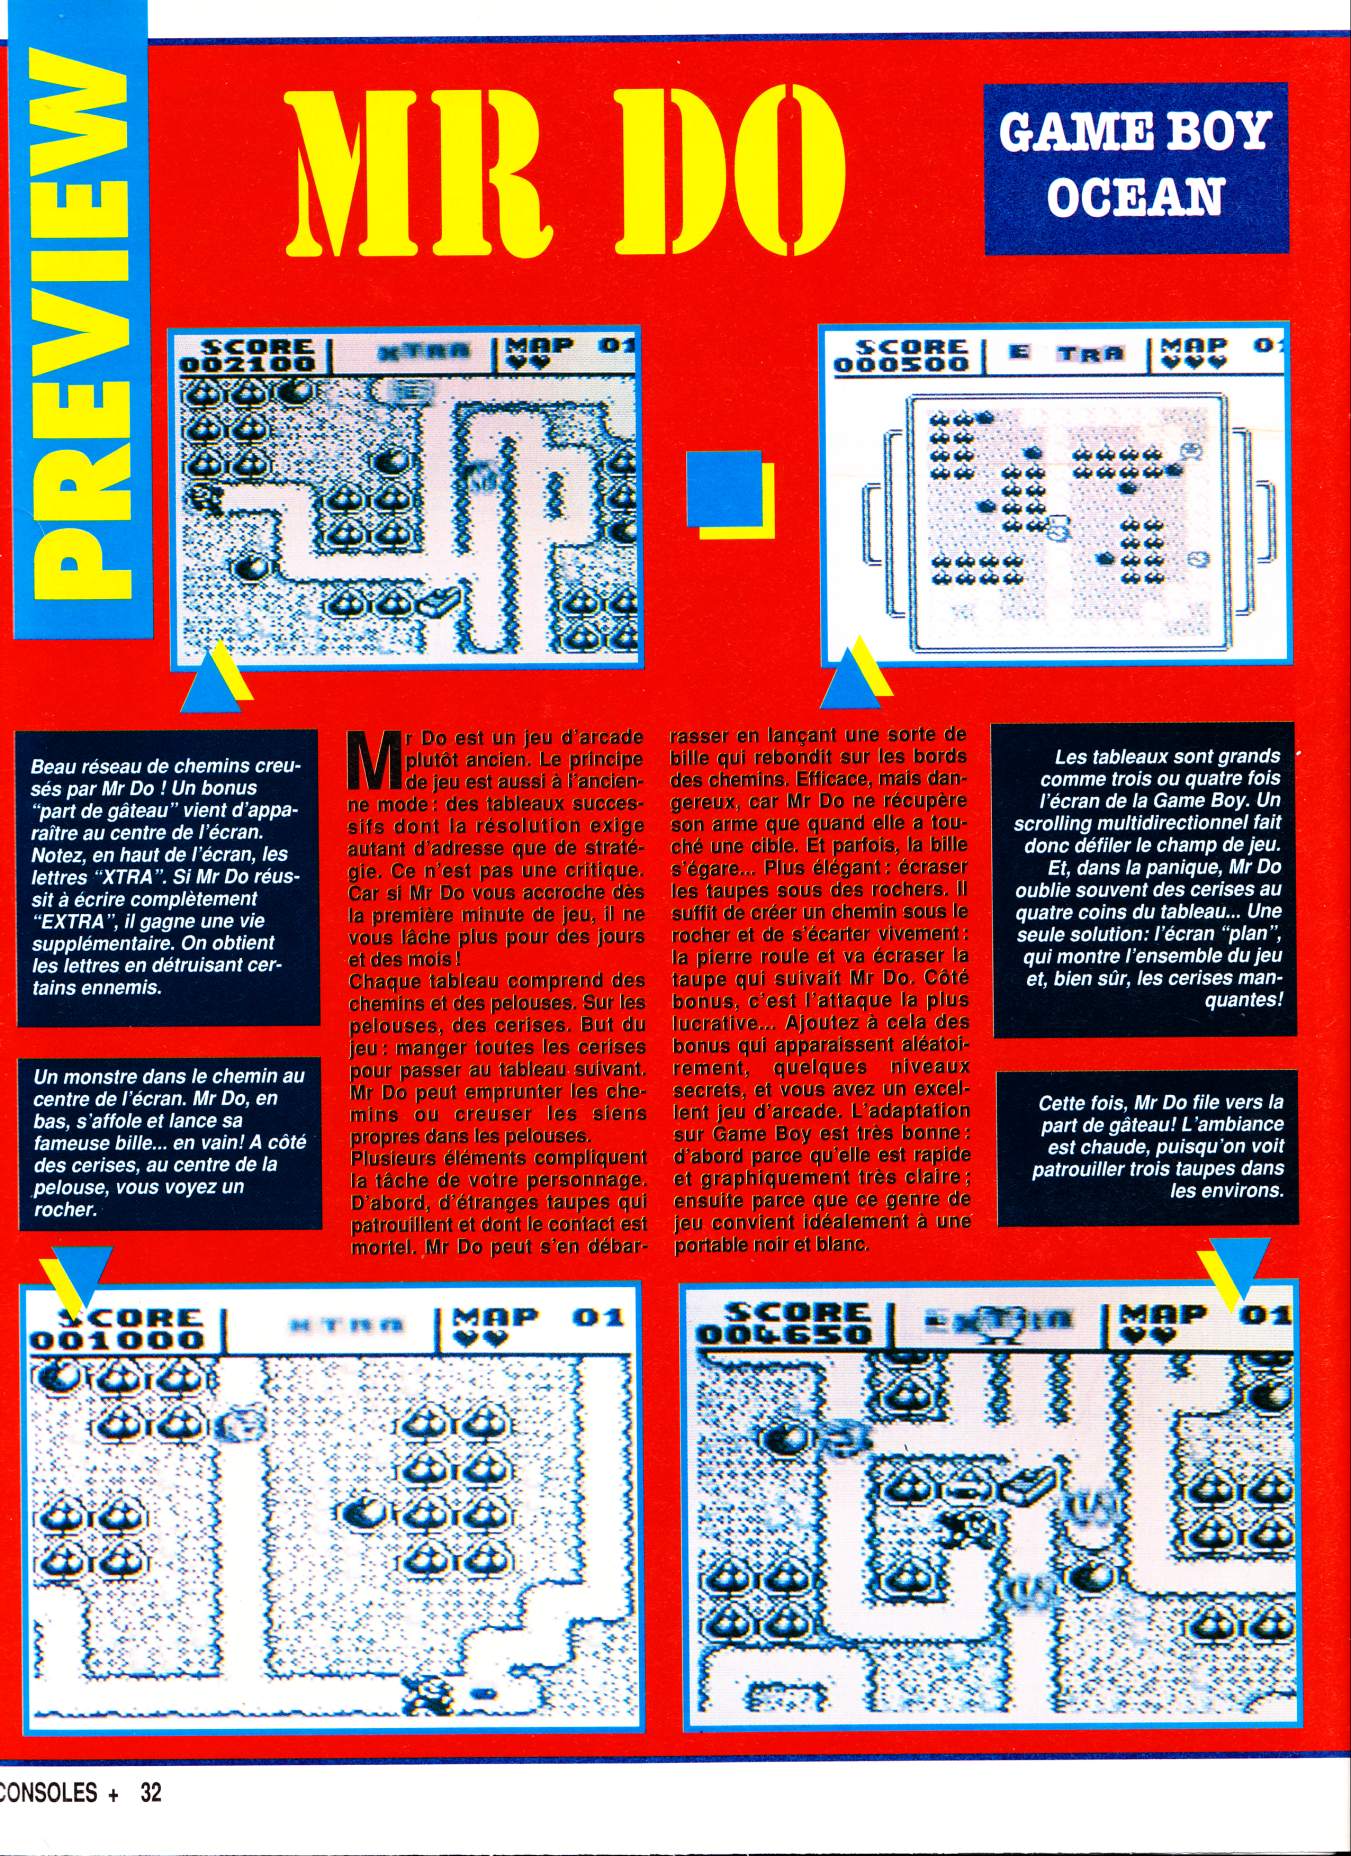 tests/989/Consoles + 008 - Page 032 (1992-04).jpg